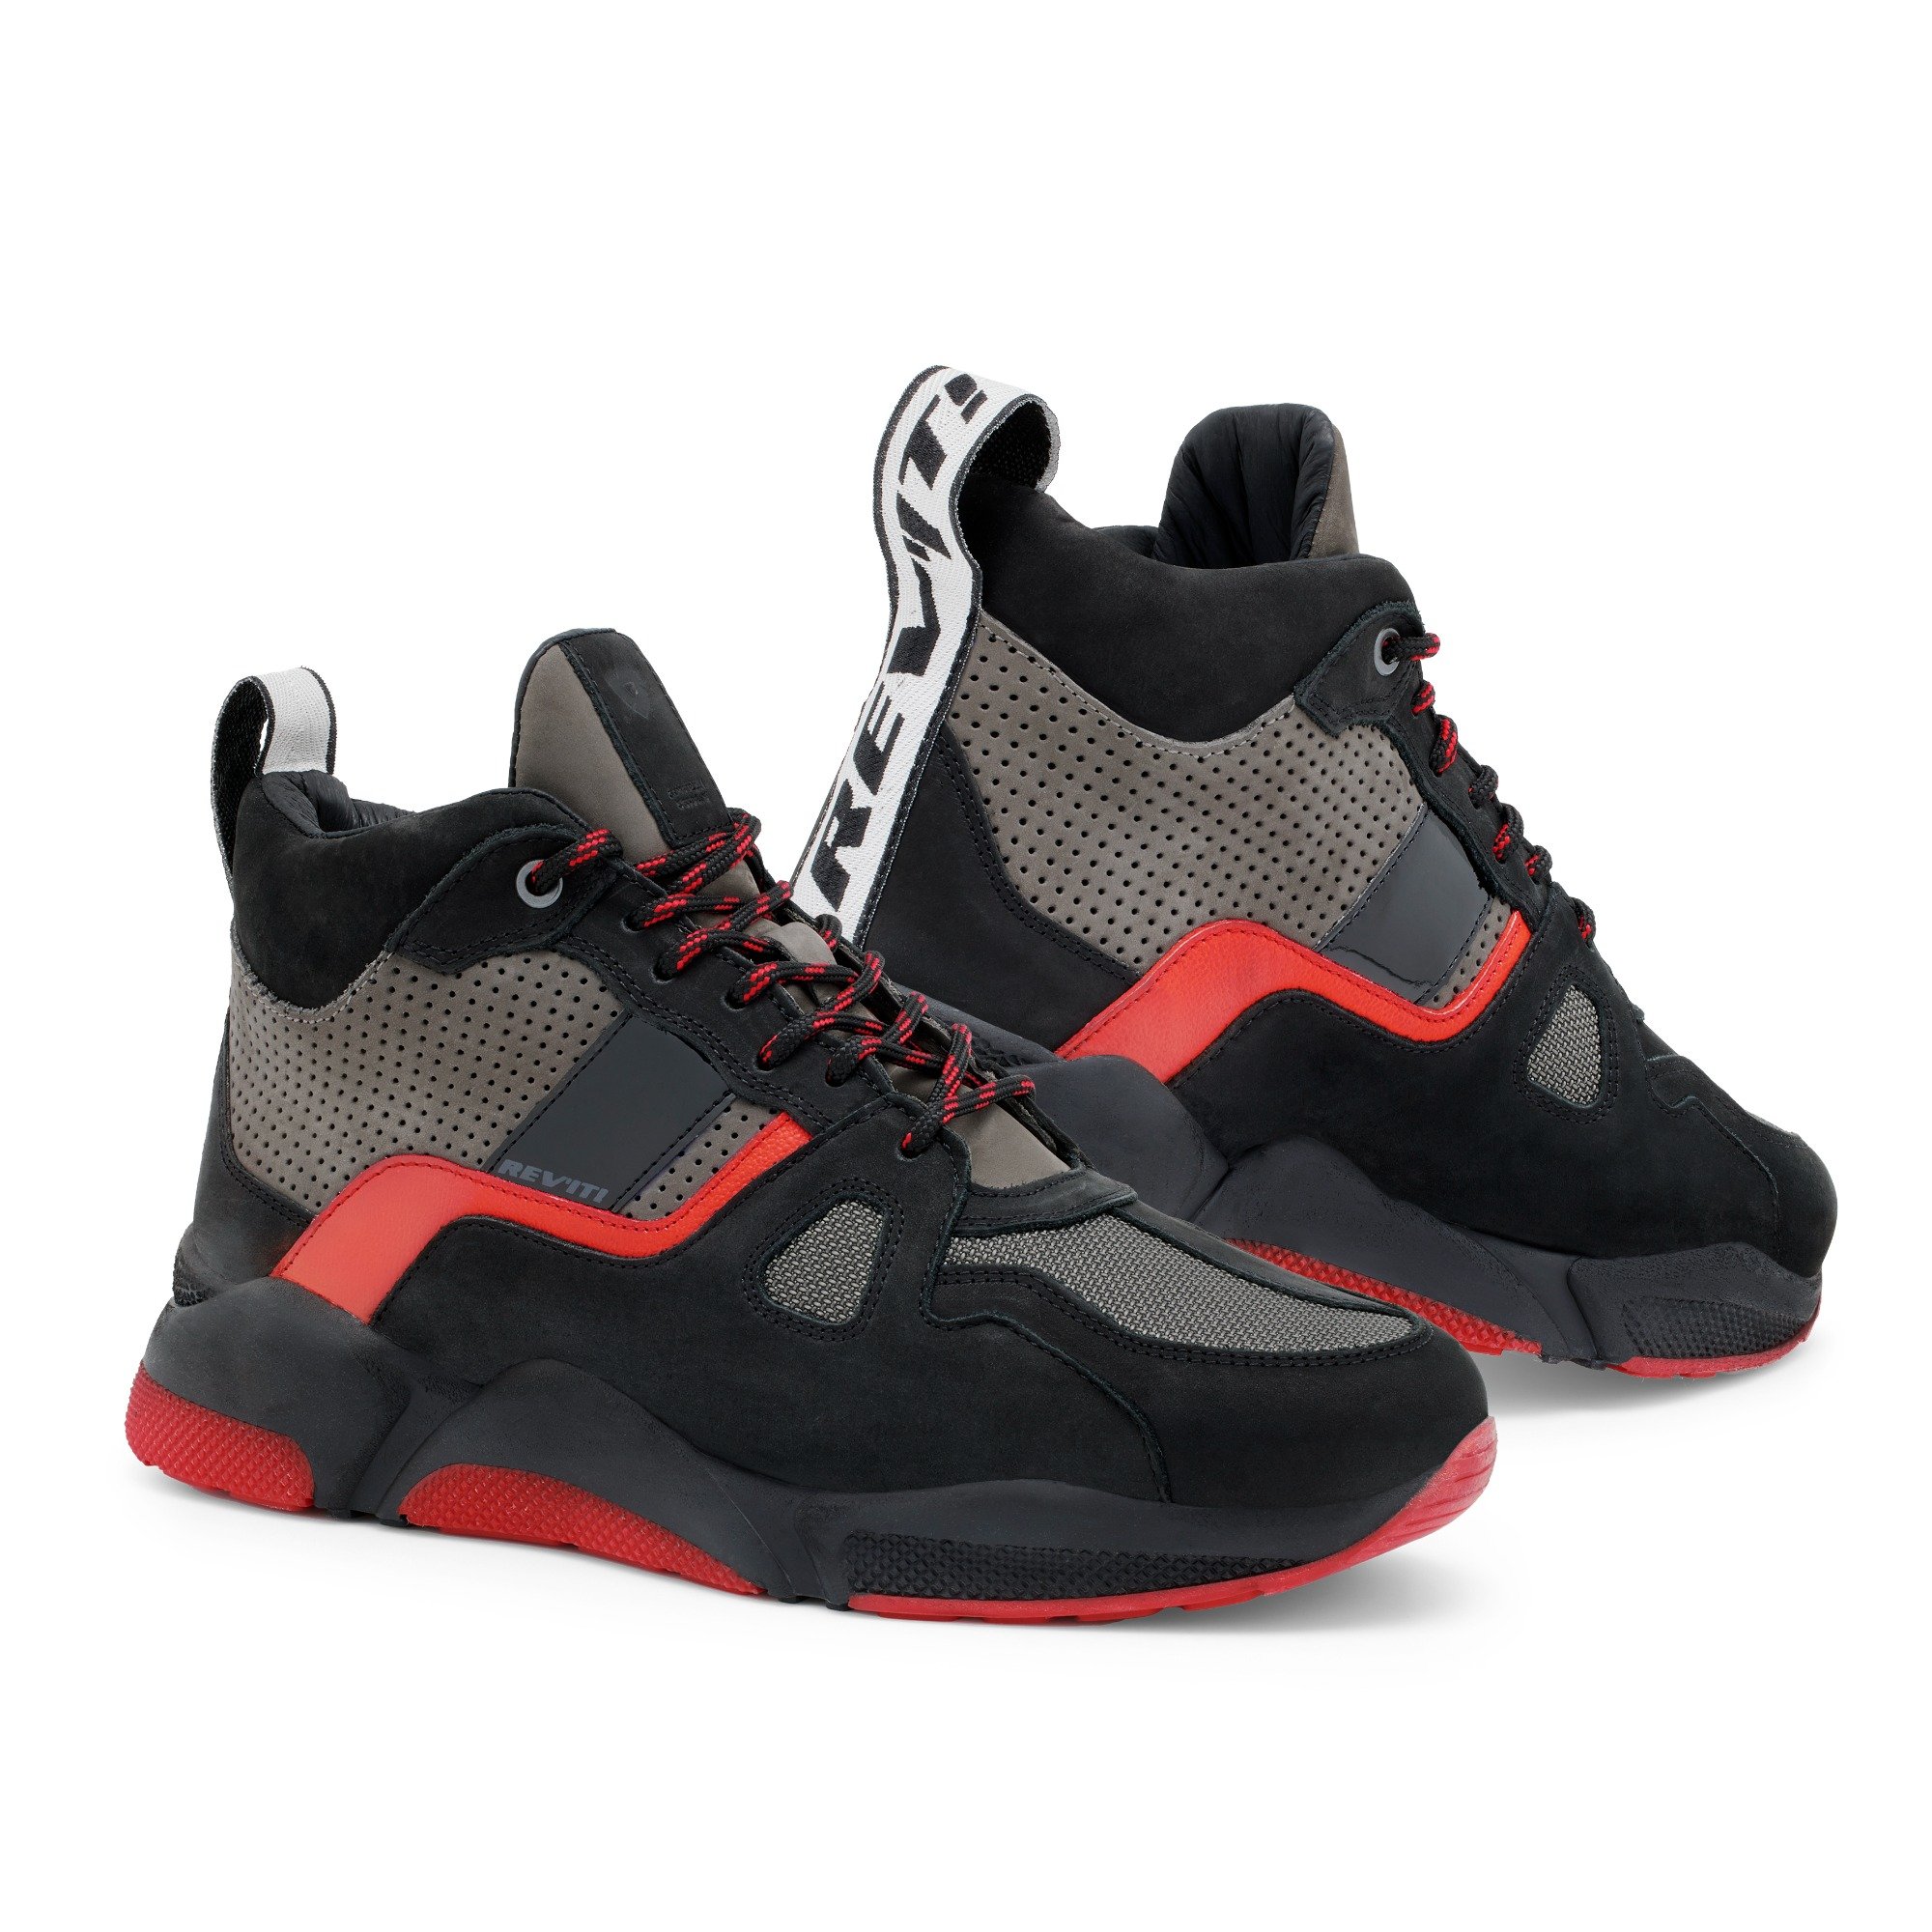 Image of REV'IT! Astro Black Red Size 44 ID 8700001356831